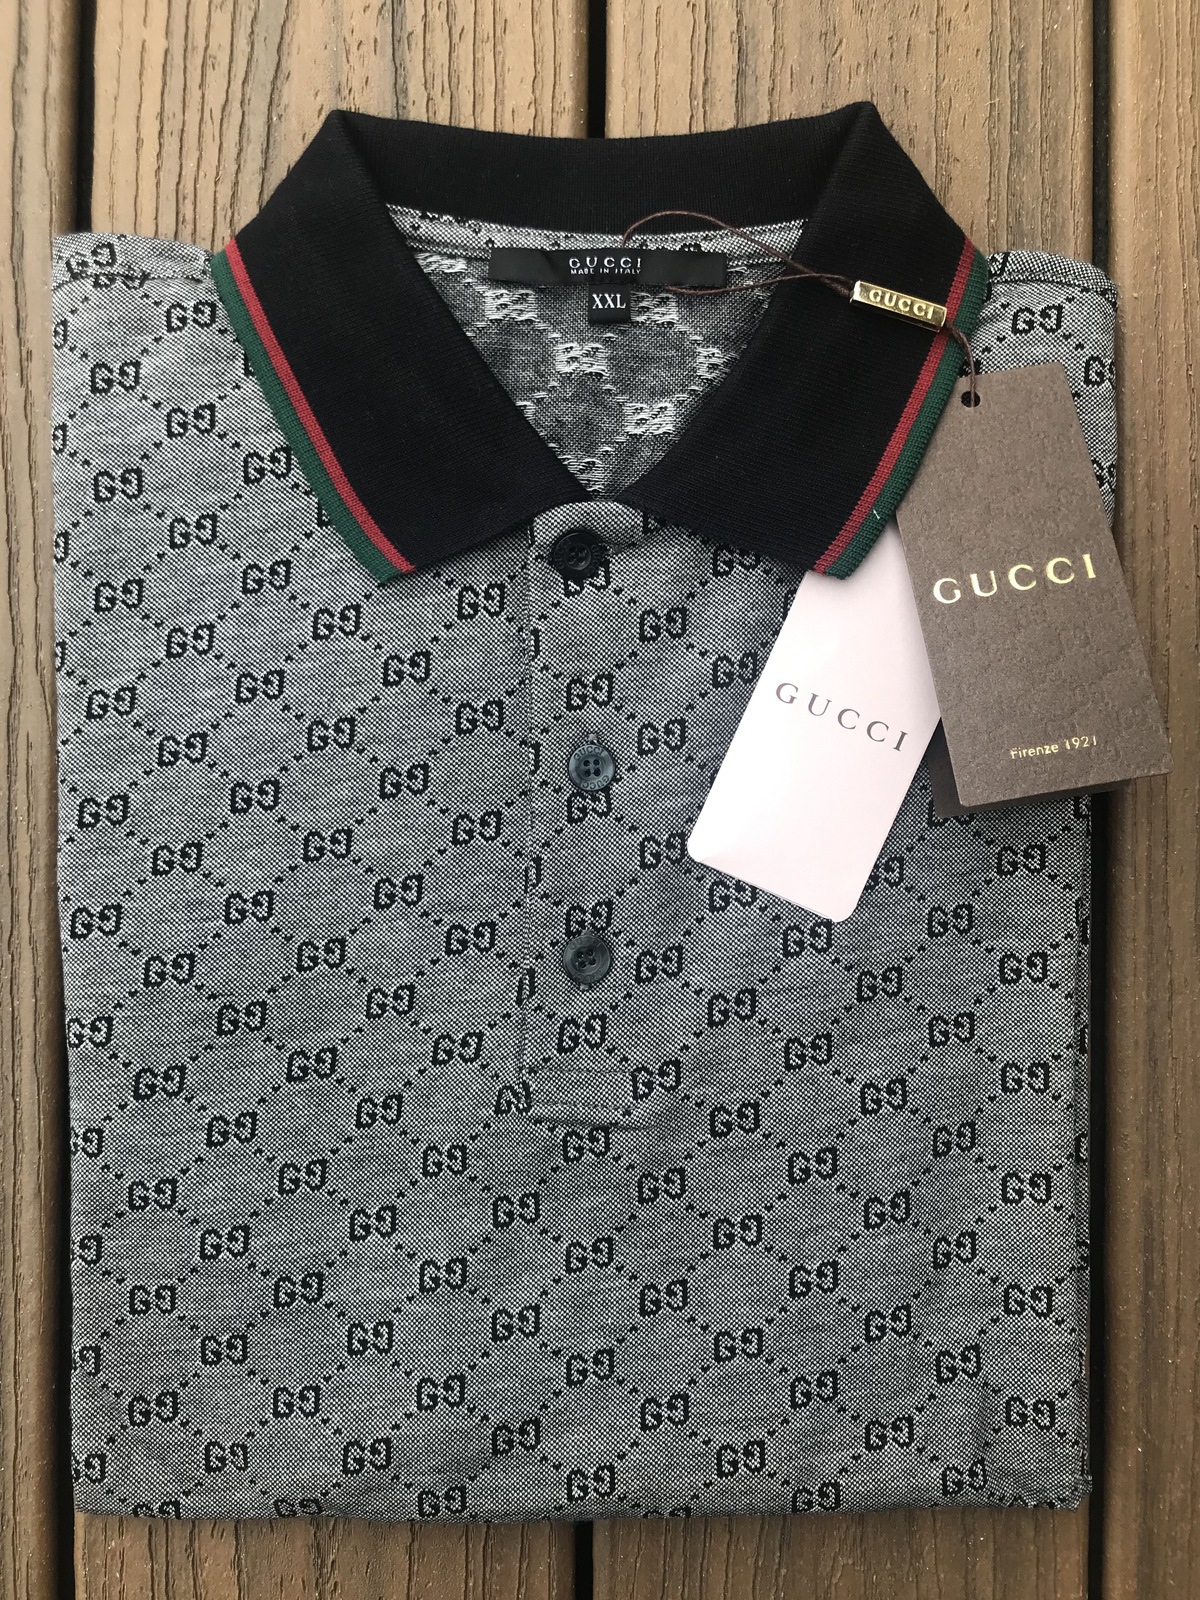 how to tell if a gucci polo is real